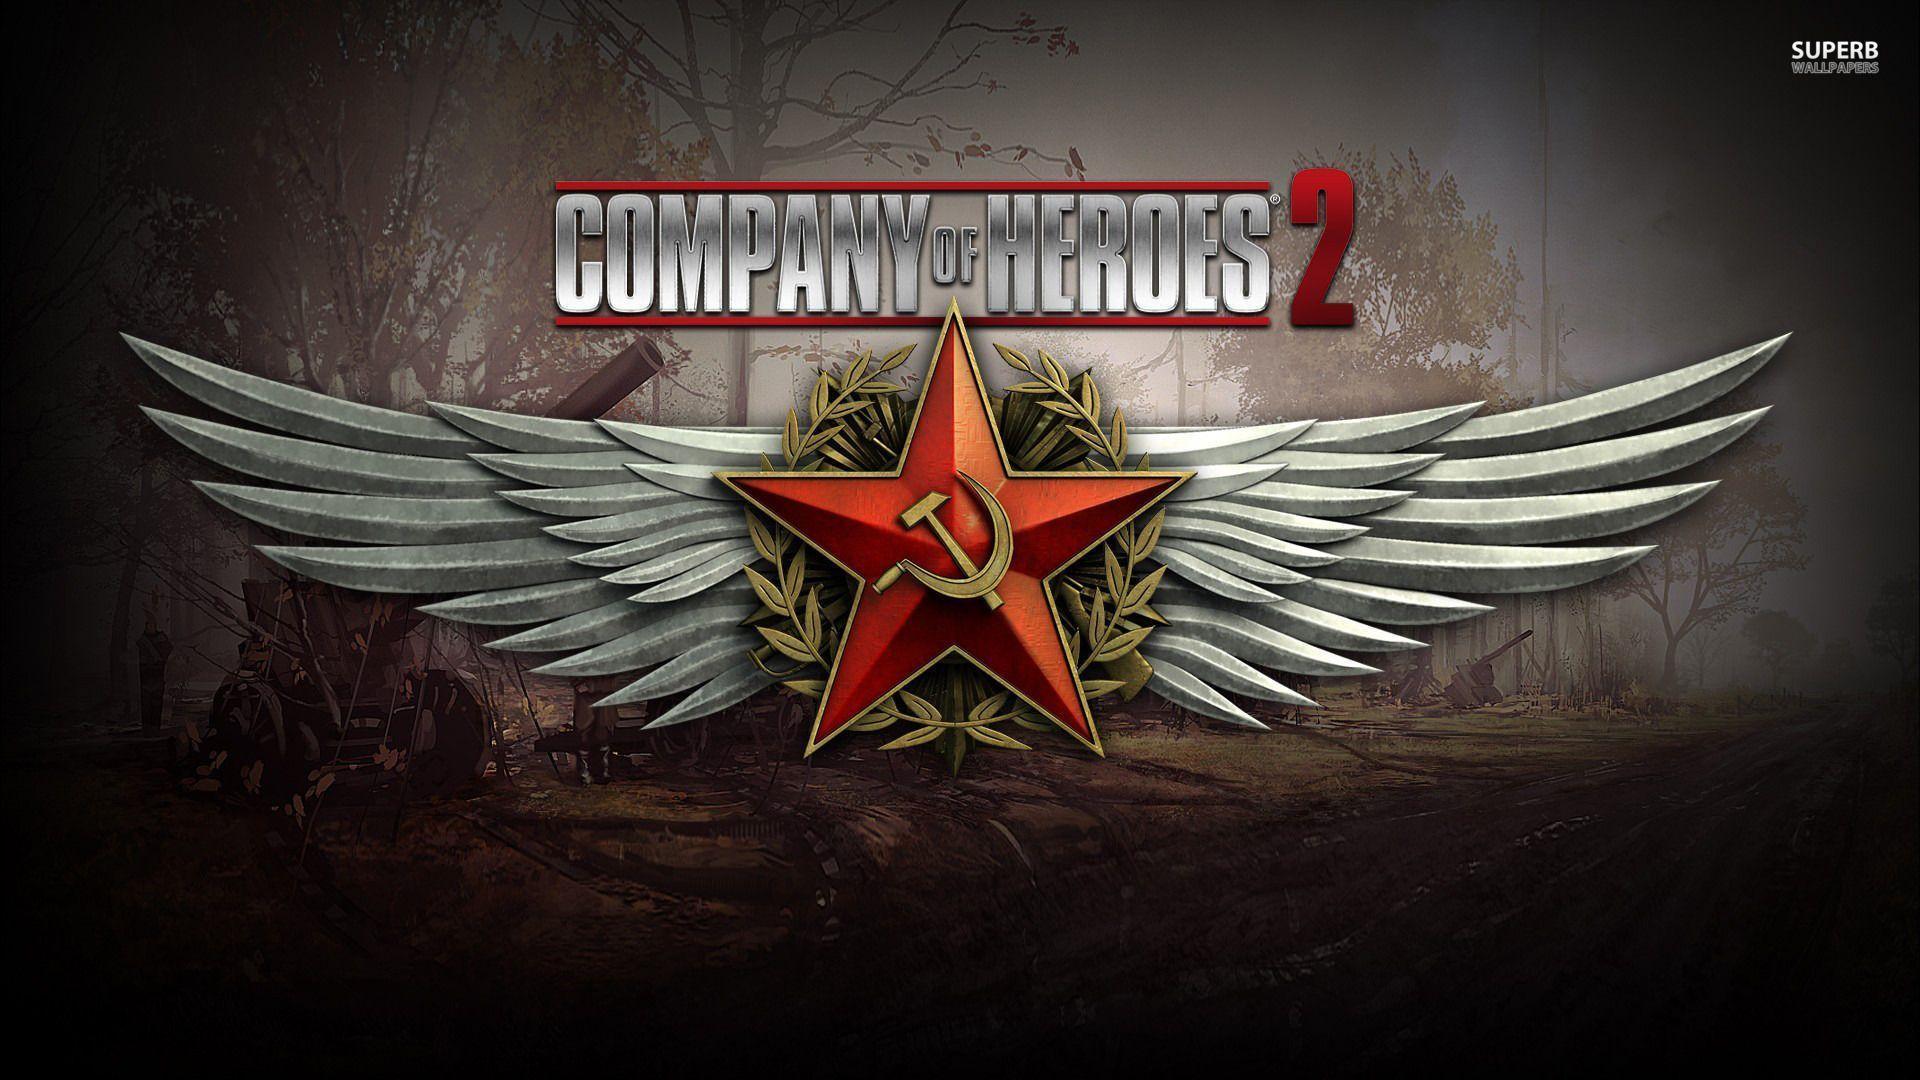 Company of Heroes 2 wallpapers